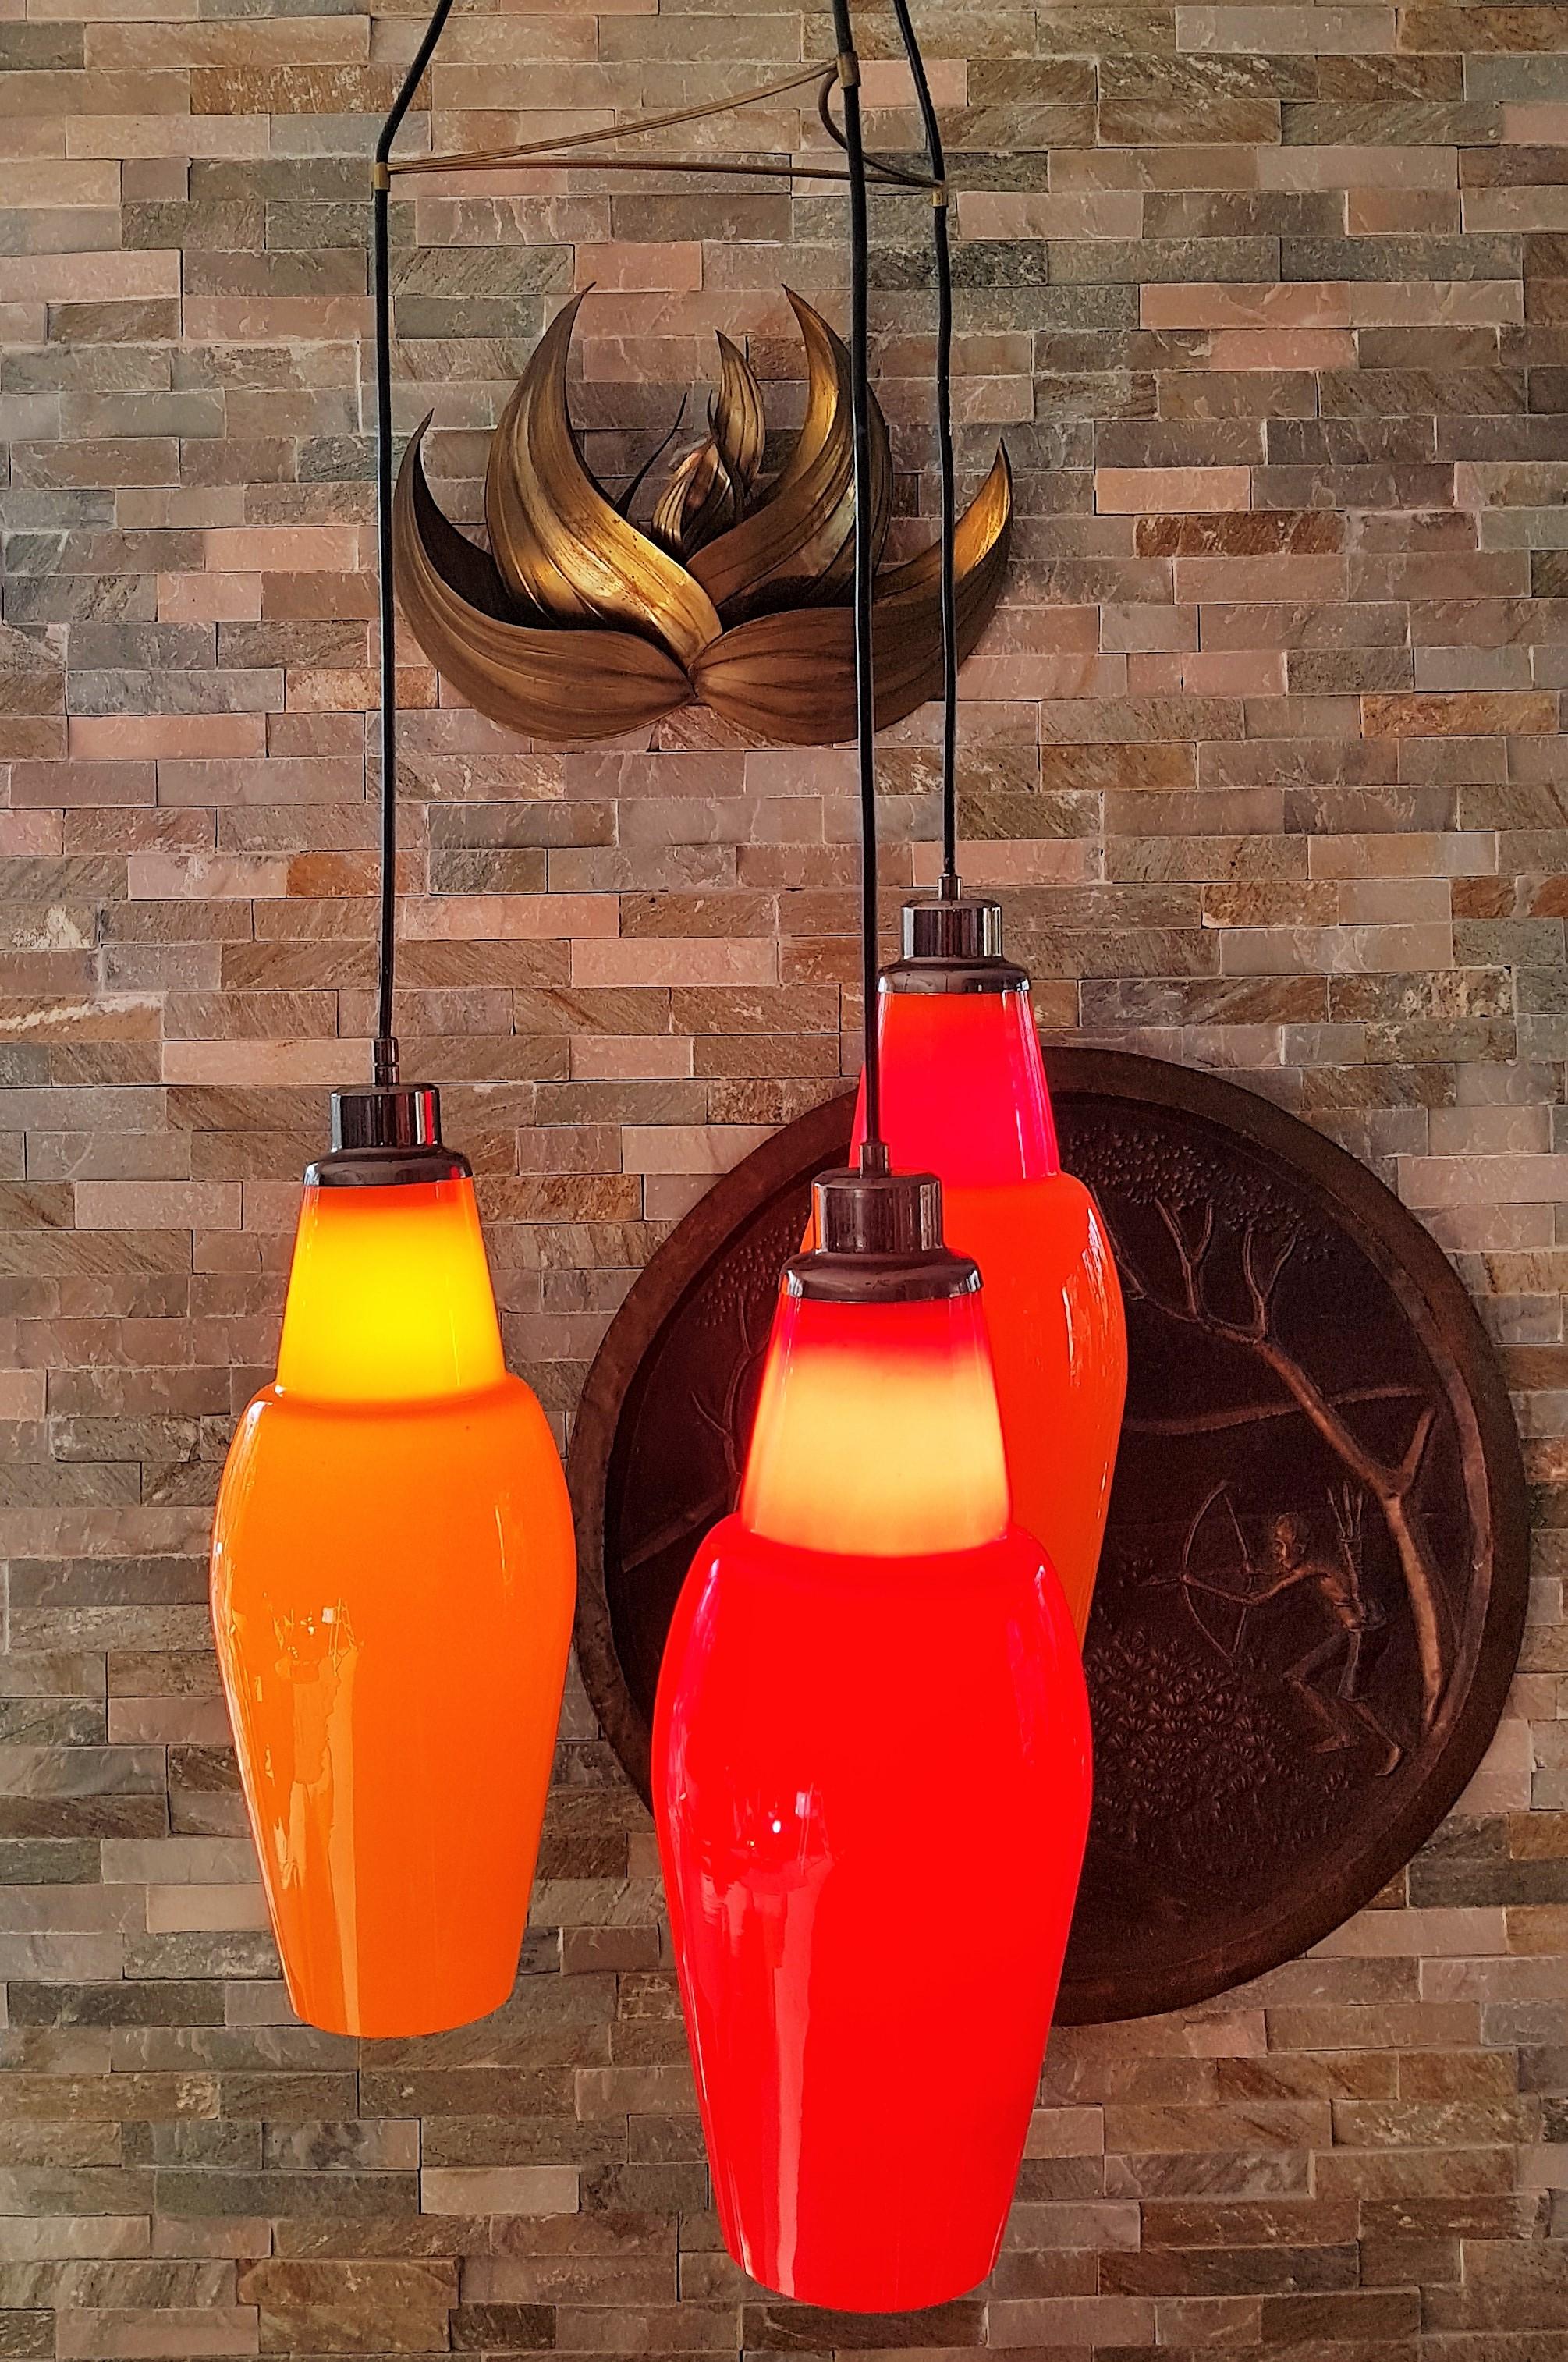 Cascade Midcentury Chandelier Pendant Multi-Color by Vistosi, Italy, 1960s For Sale 8